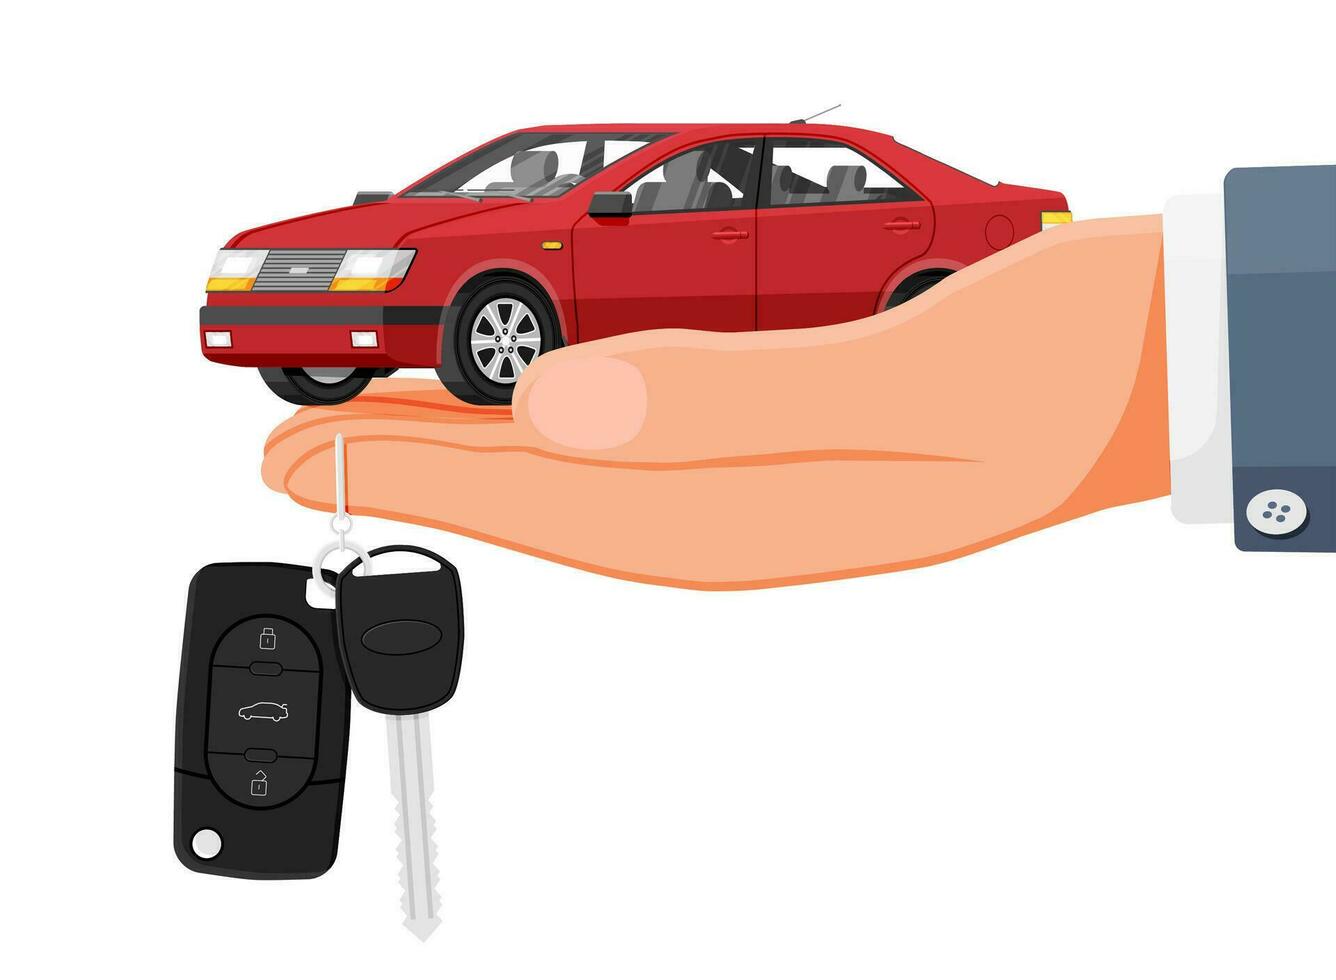 Passenger Car Side View. Sedan in Hand with Key. Modern City Car Isolated. Color Urban Vehicle. Automobile Concept on White Background. Cartoon Flat Vector Illustration